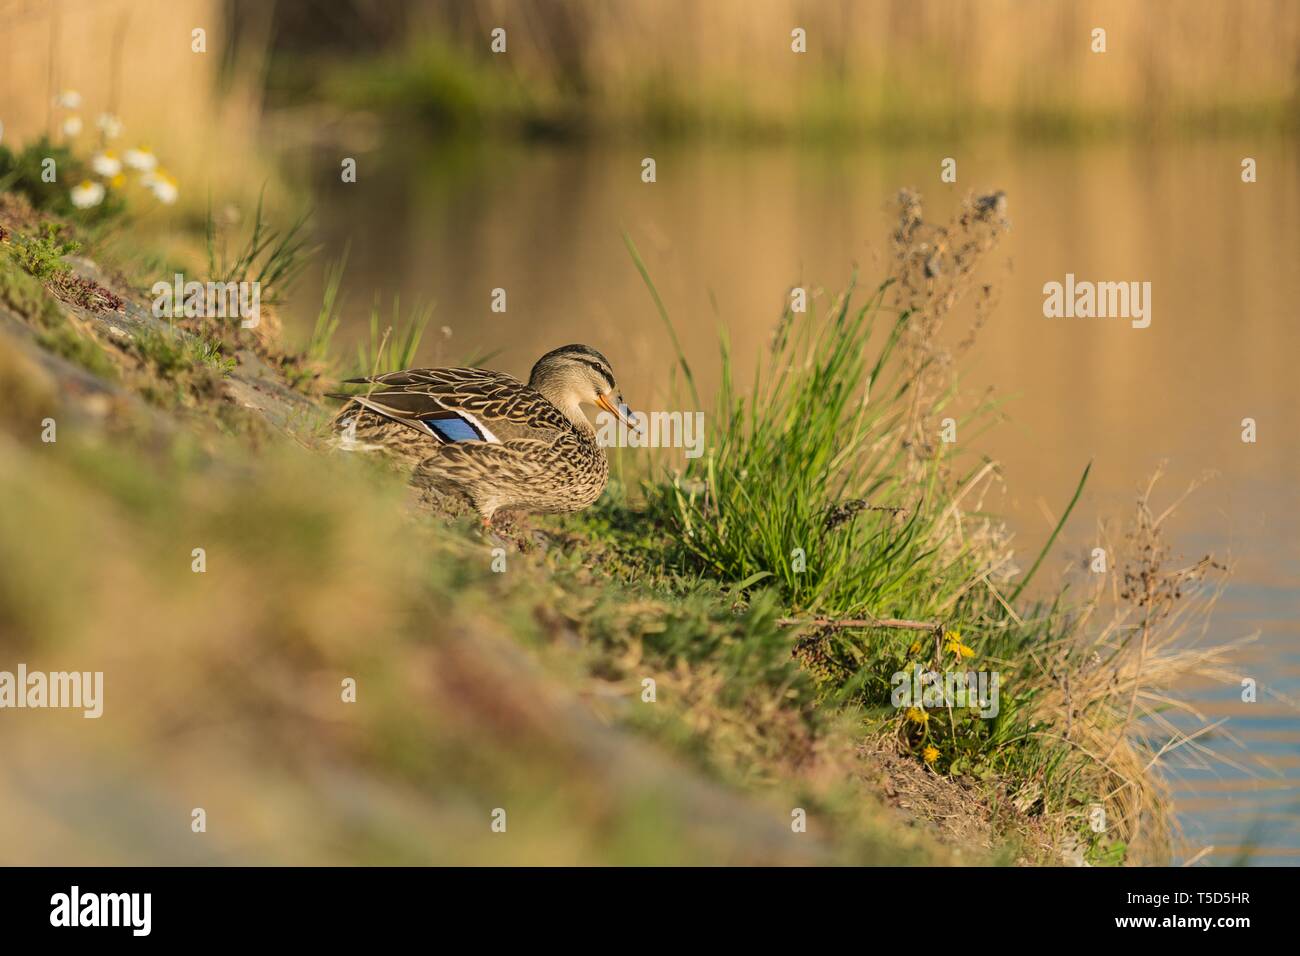 Sunny spring day at a lake, female brown mallard duck standing on lakeside, green grass and flowers, reflection of reeds in water in background, blurr Stock Photo